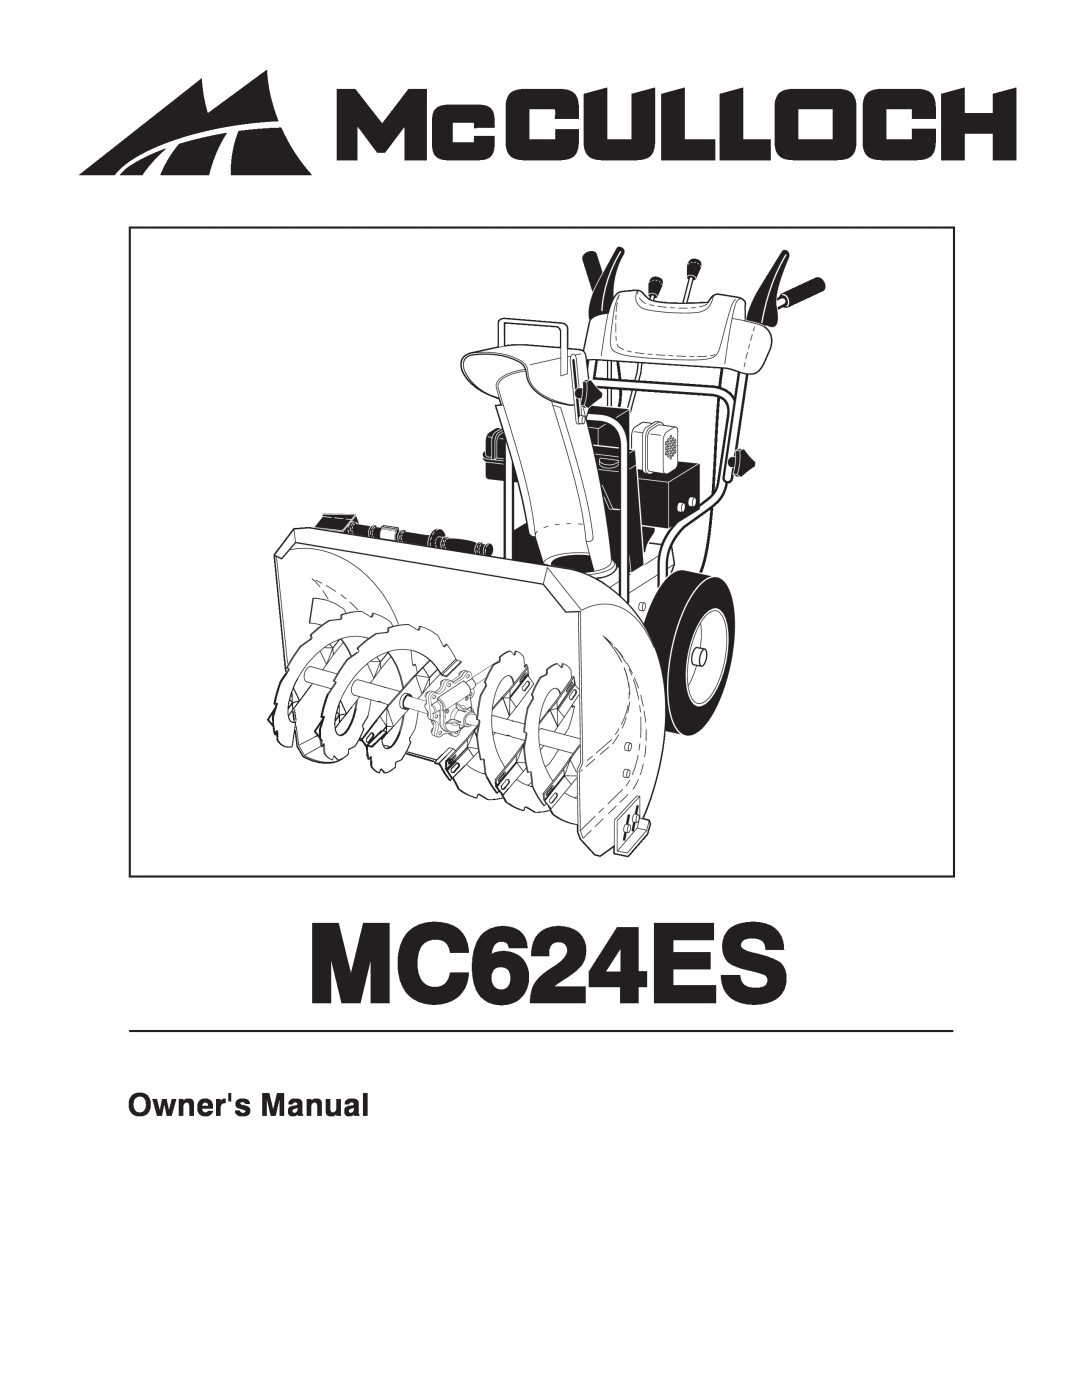 McCulloch 96192004001 owner manual Owners Manual, MC624ES 